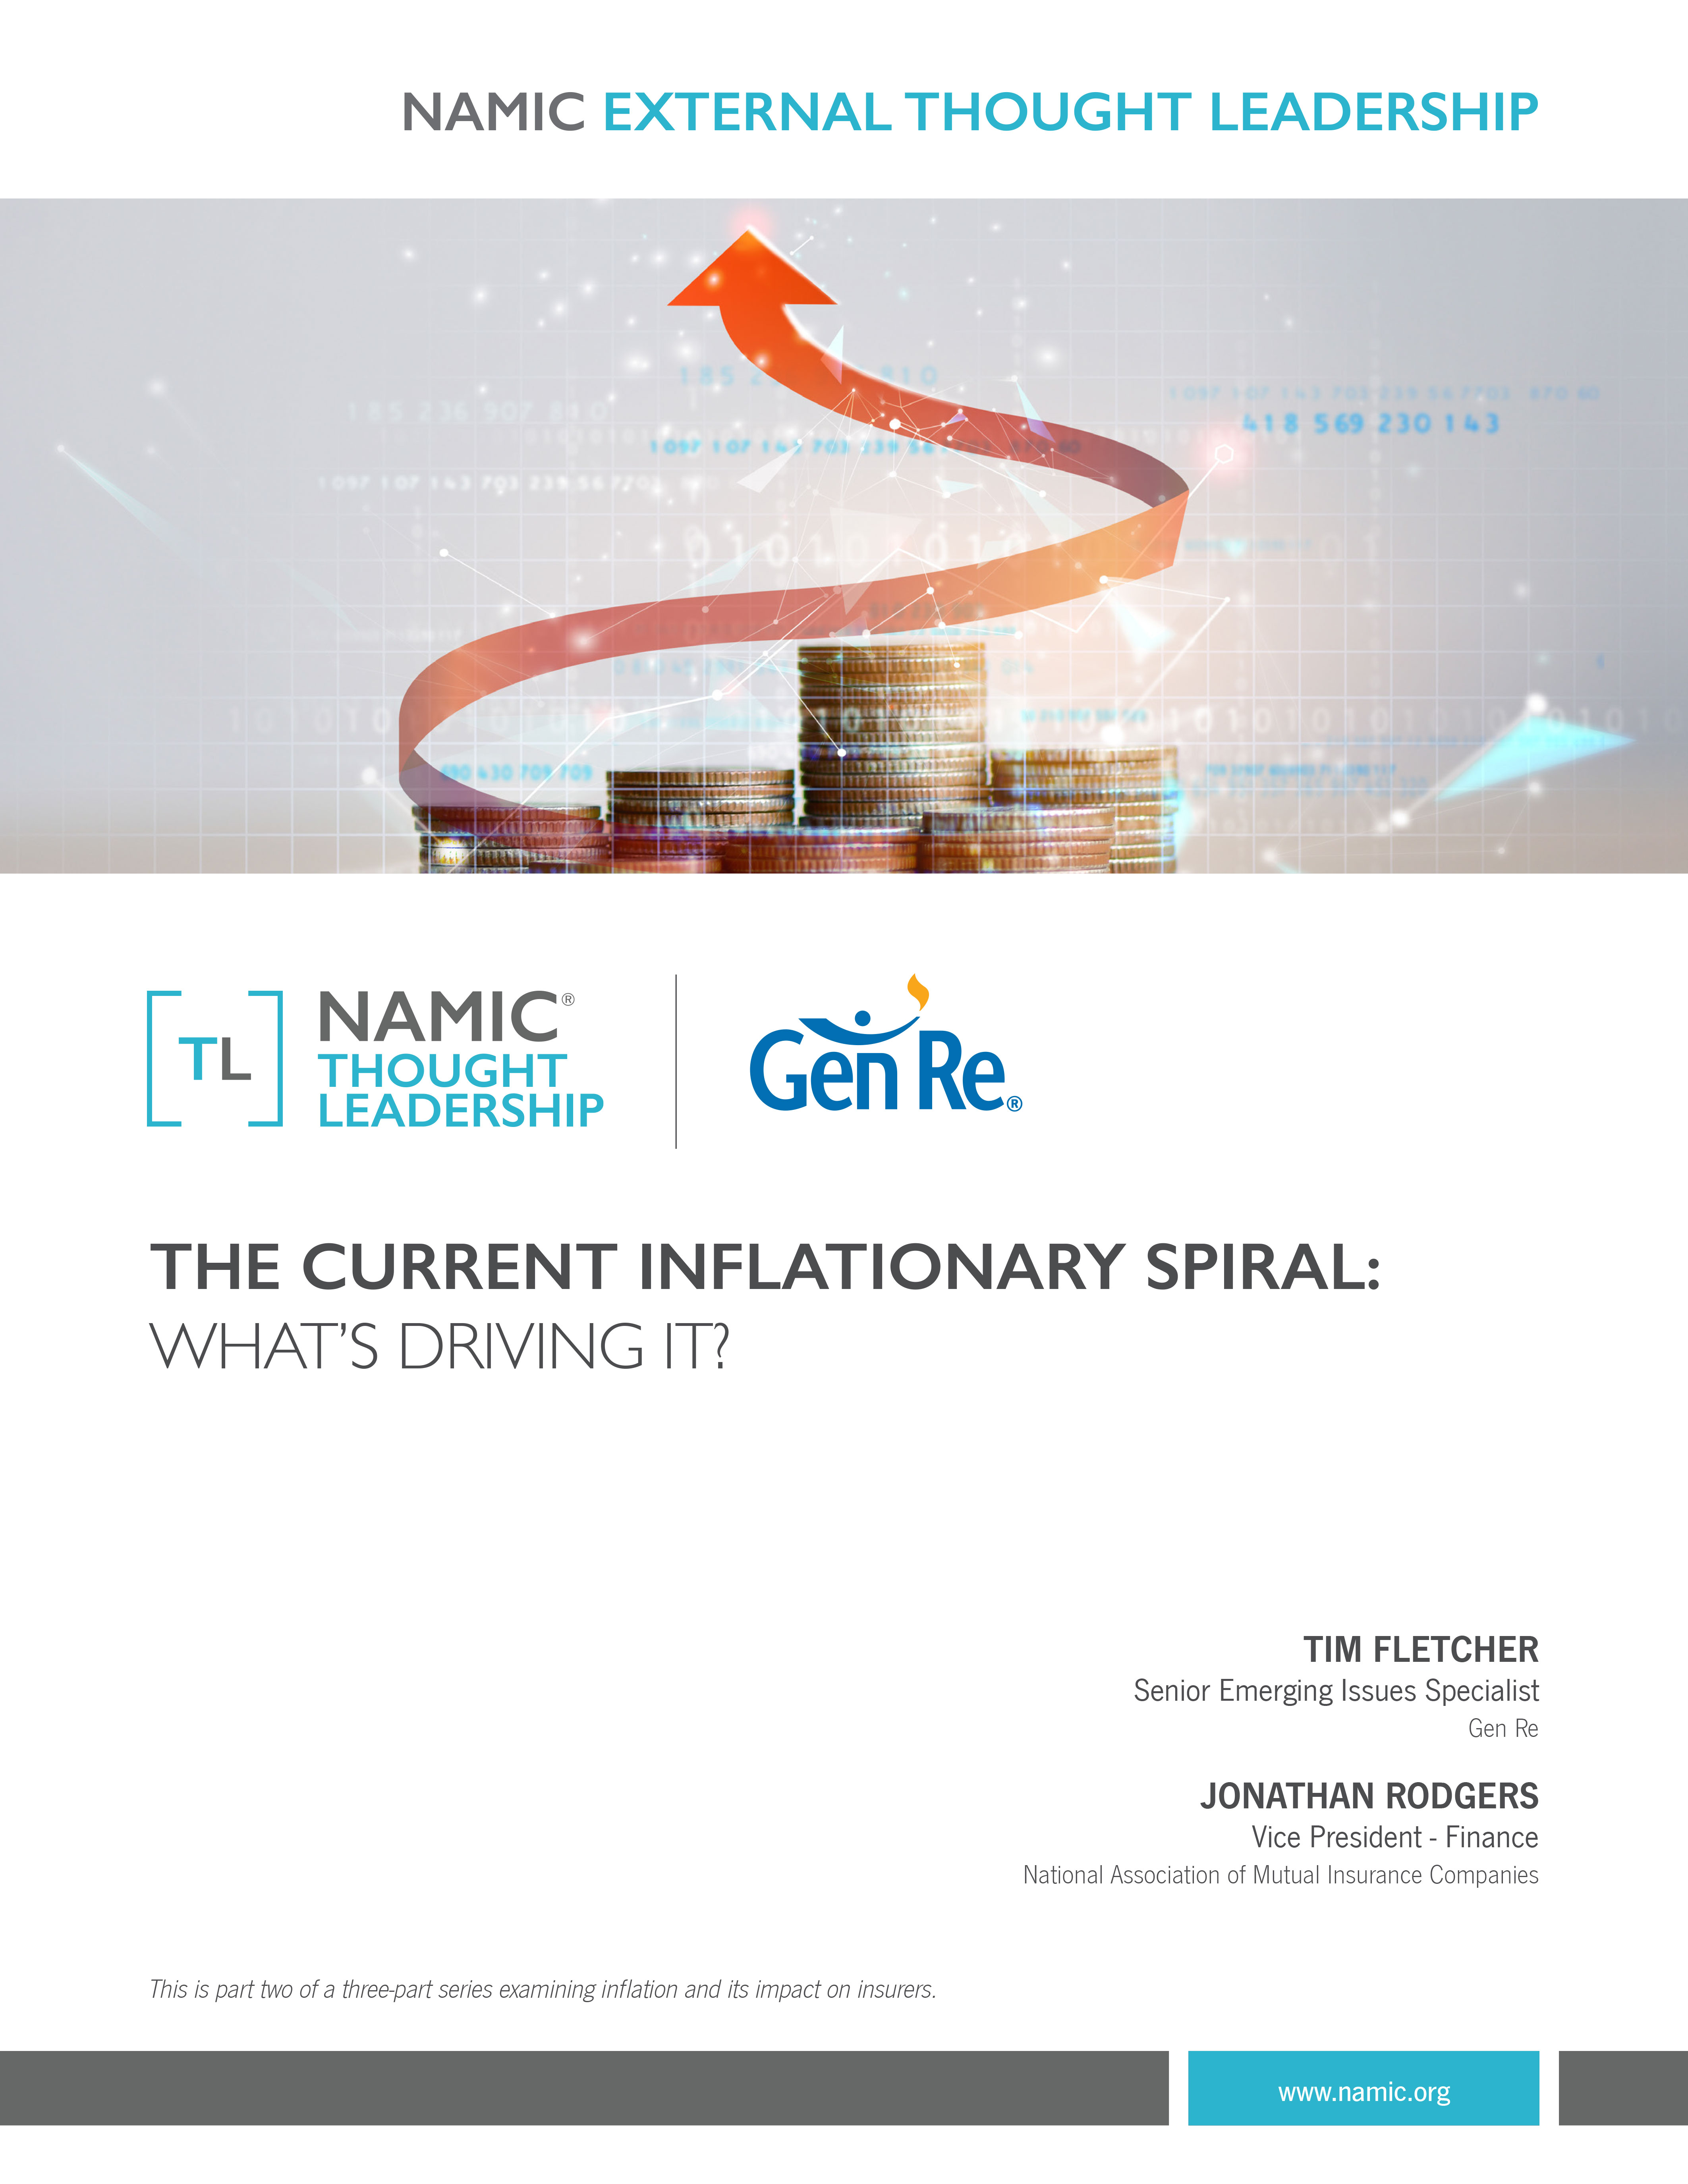 The Current Inflationary Spiral: What’s Driving It?